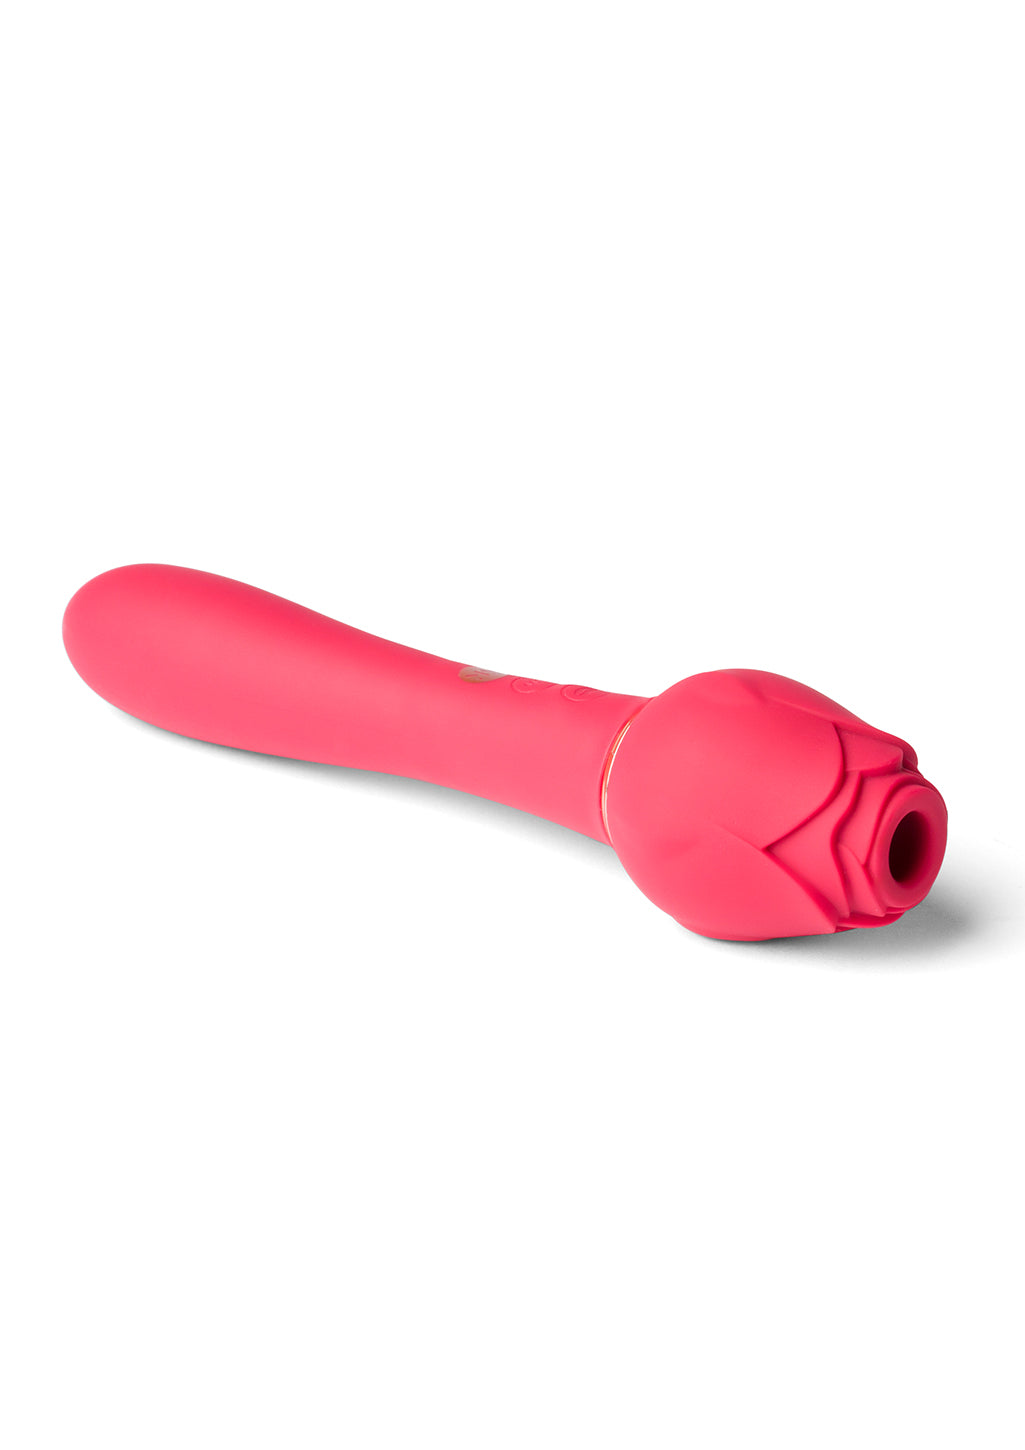 Twosome Dual Ended Suction Vibe